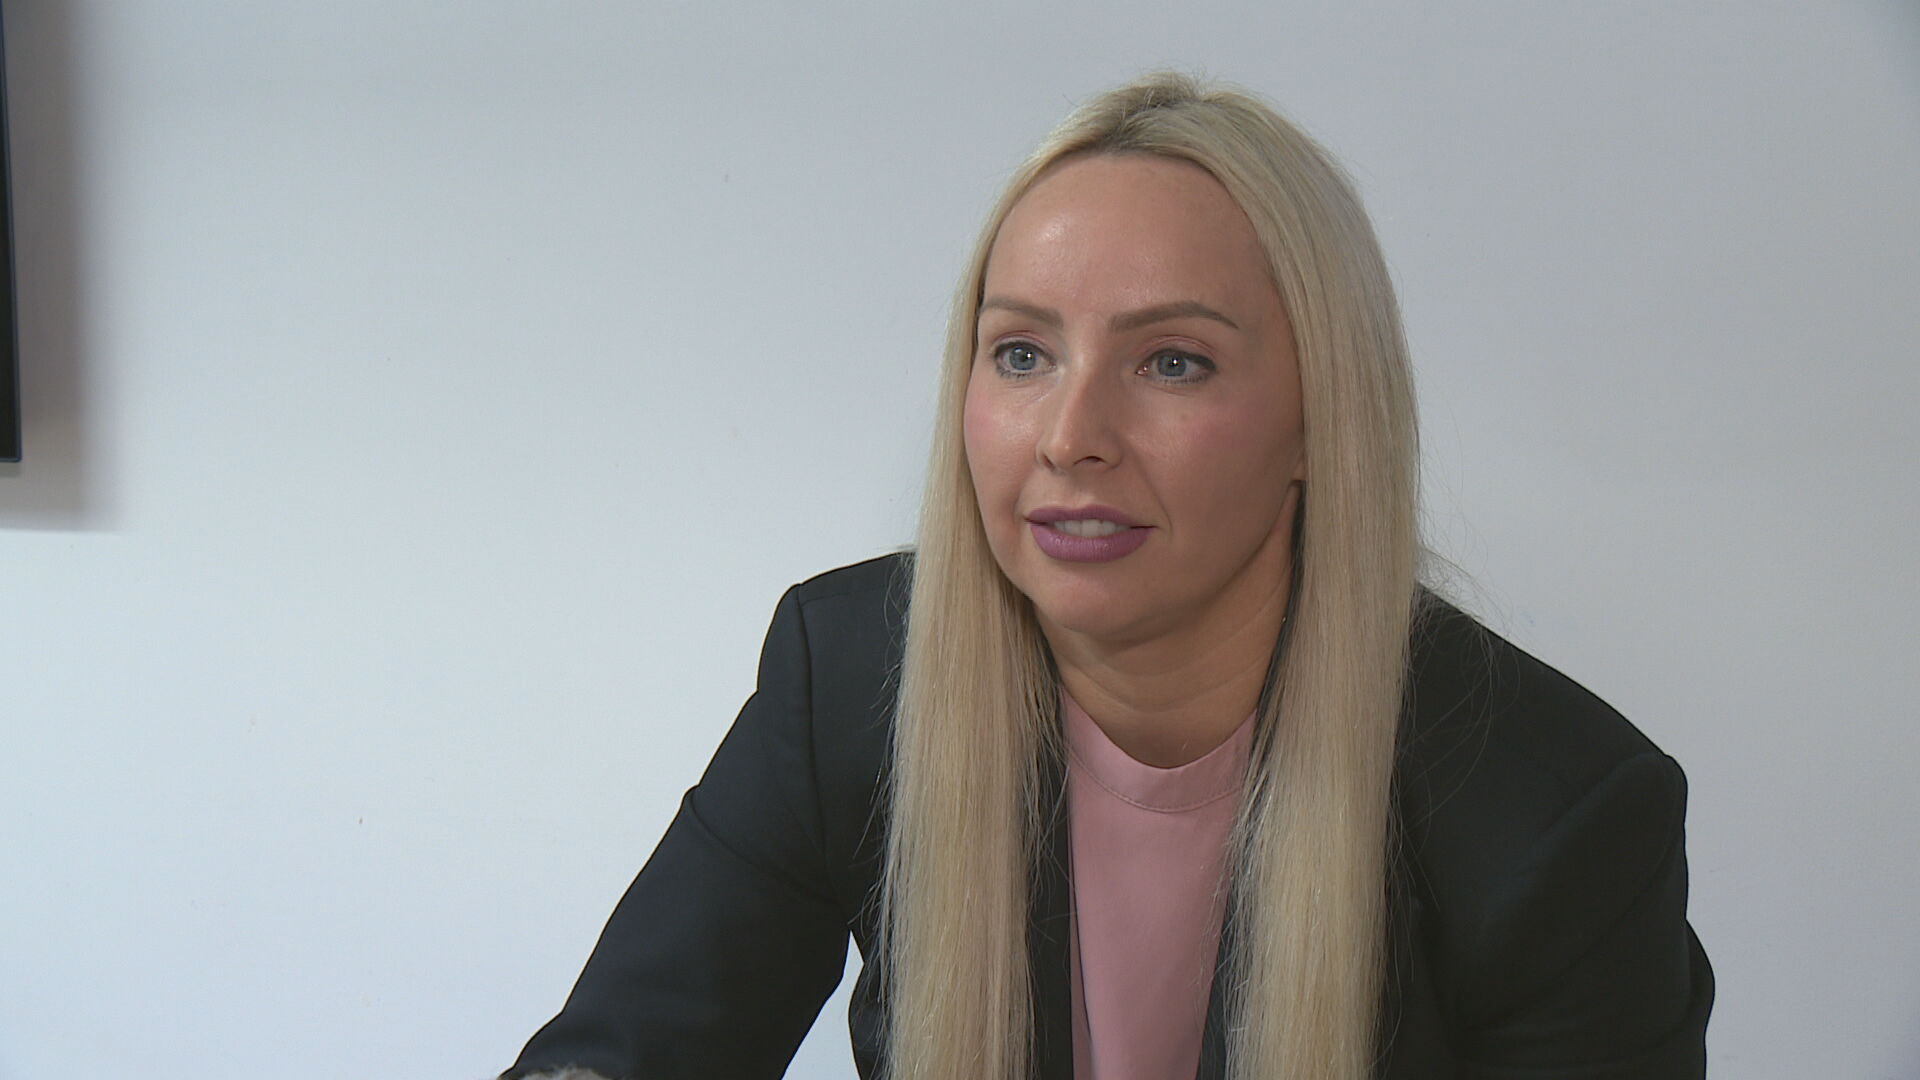 Lynsey said fastmoving rates made it difficult for even brokers to keep up.